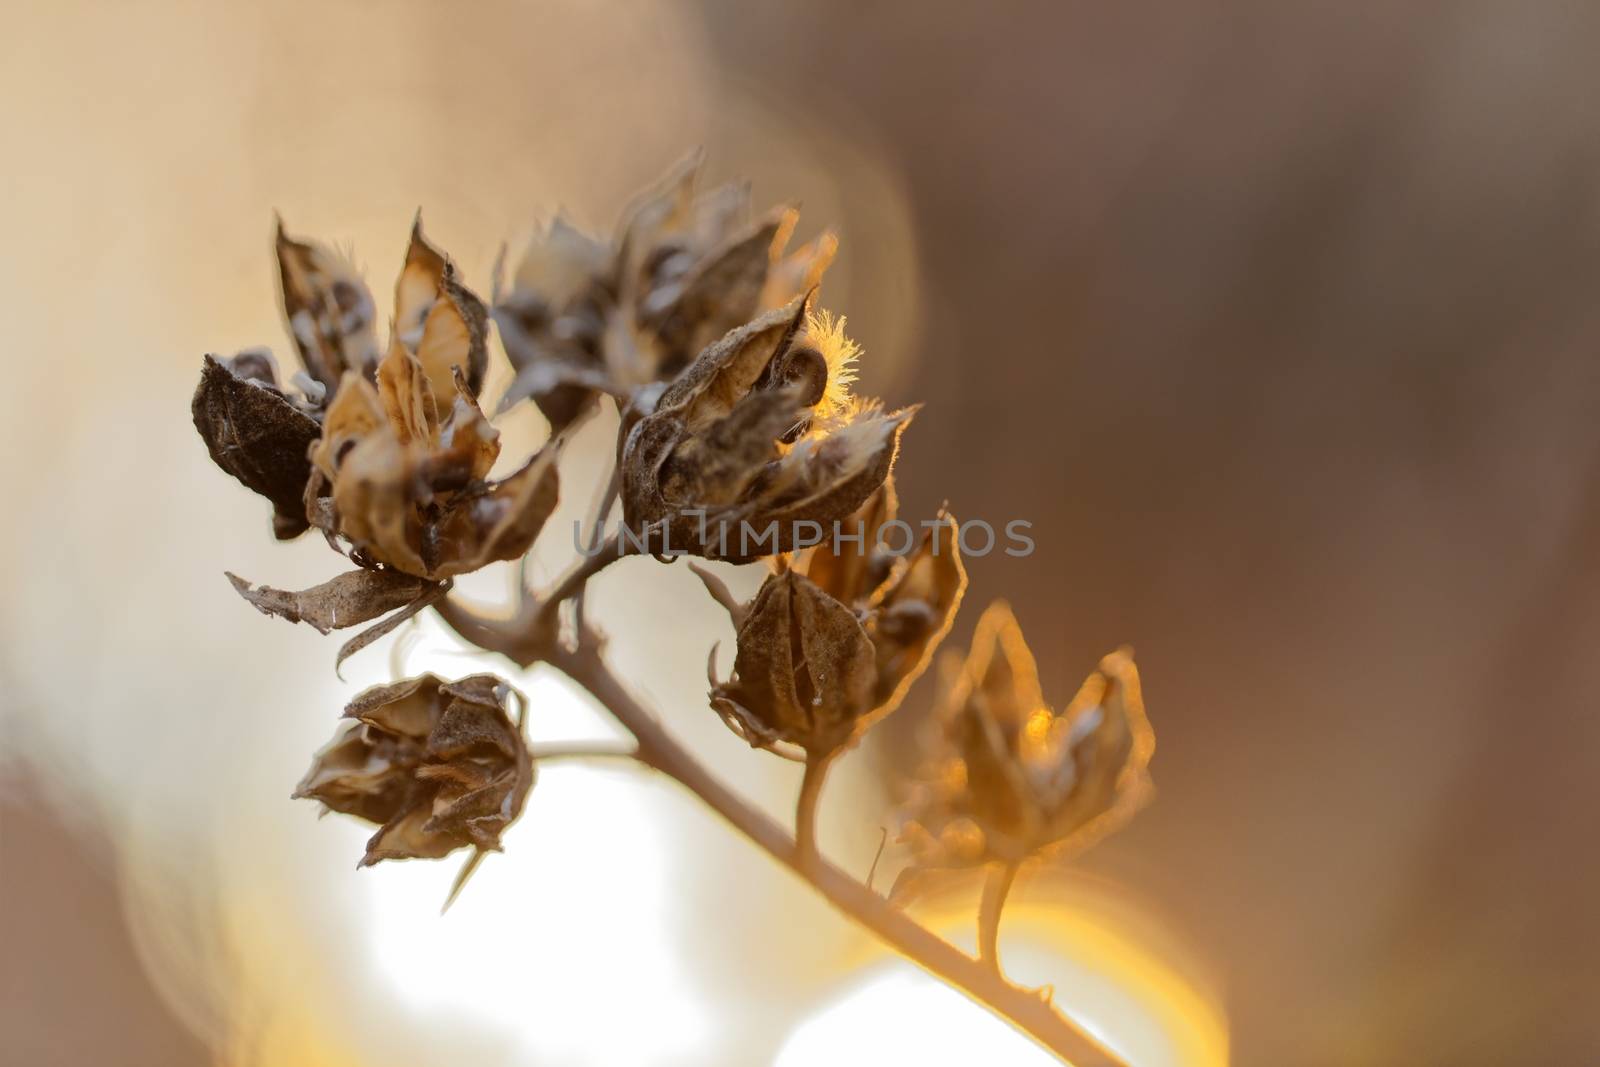 Small dry plant agains sunny background closeup photo